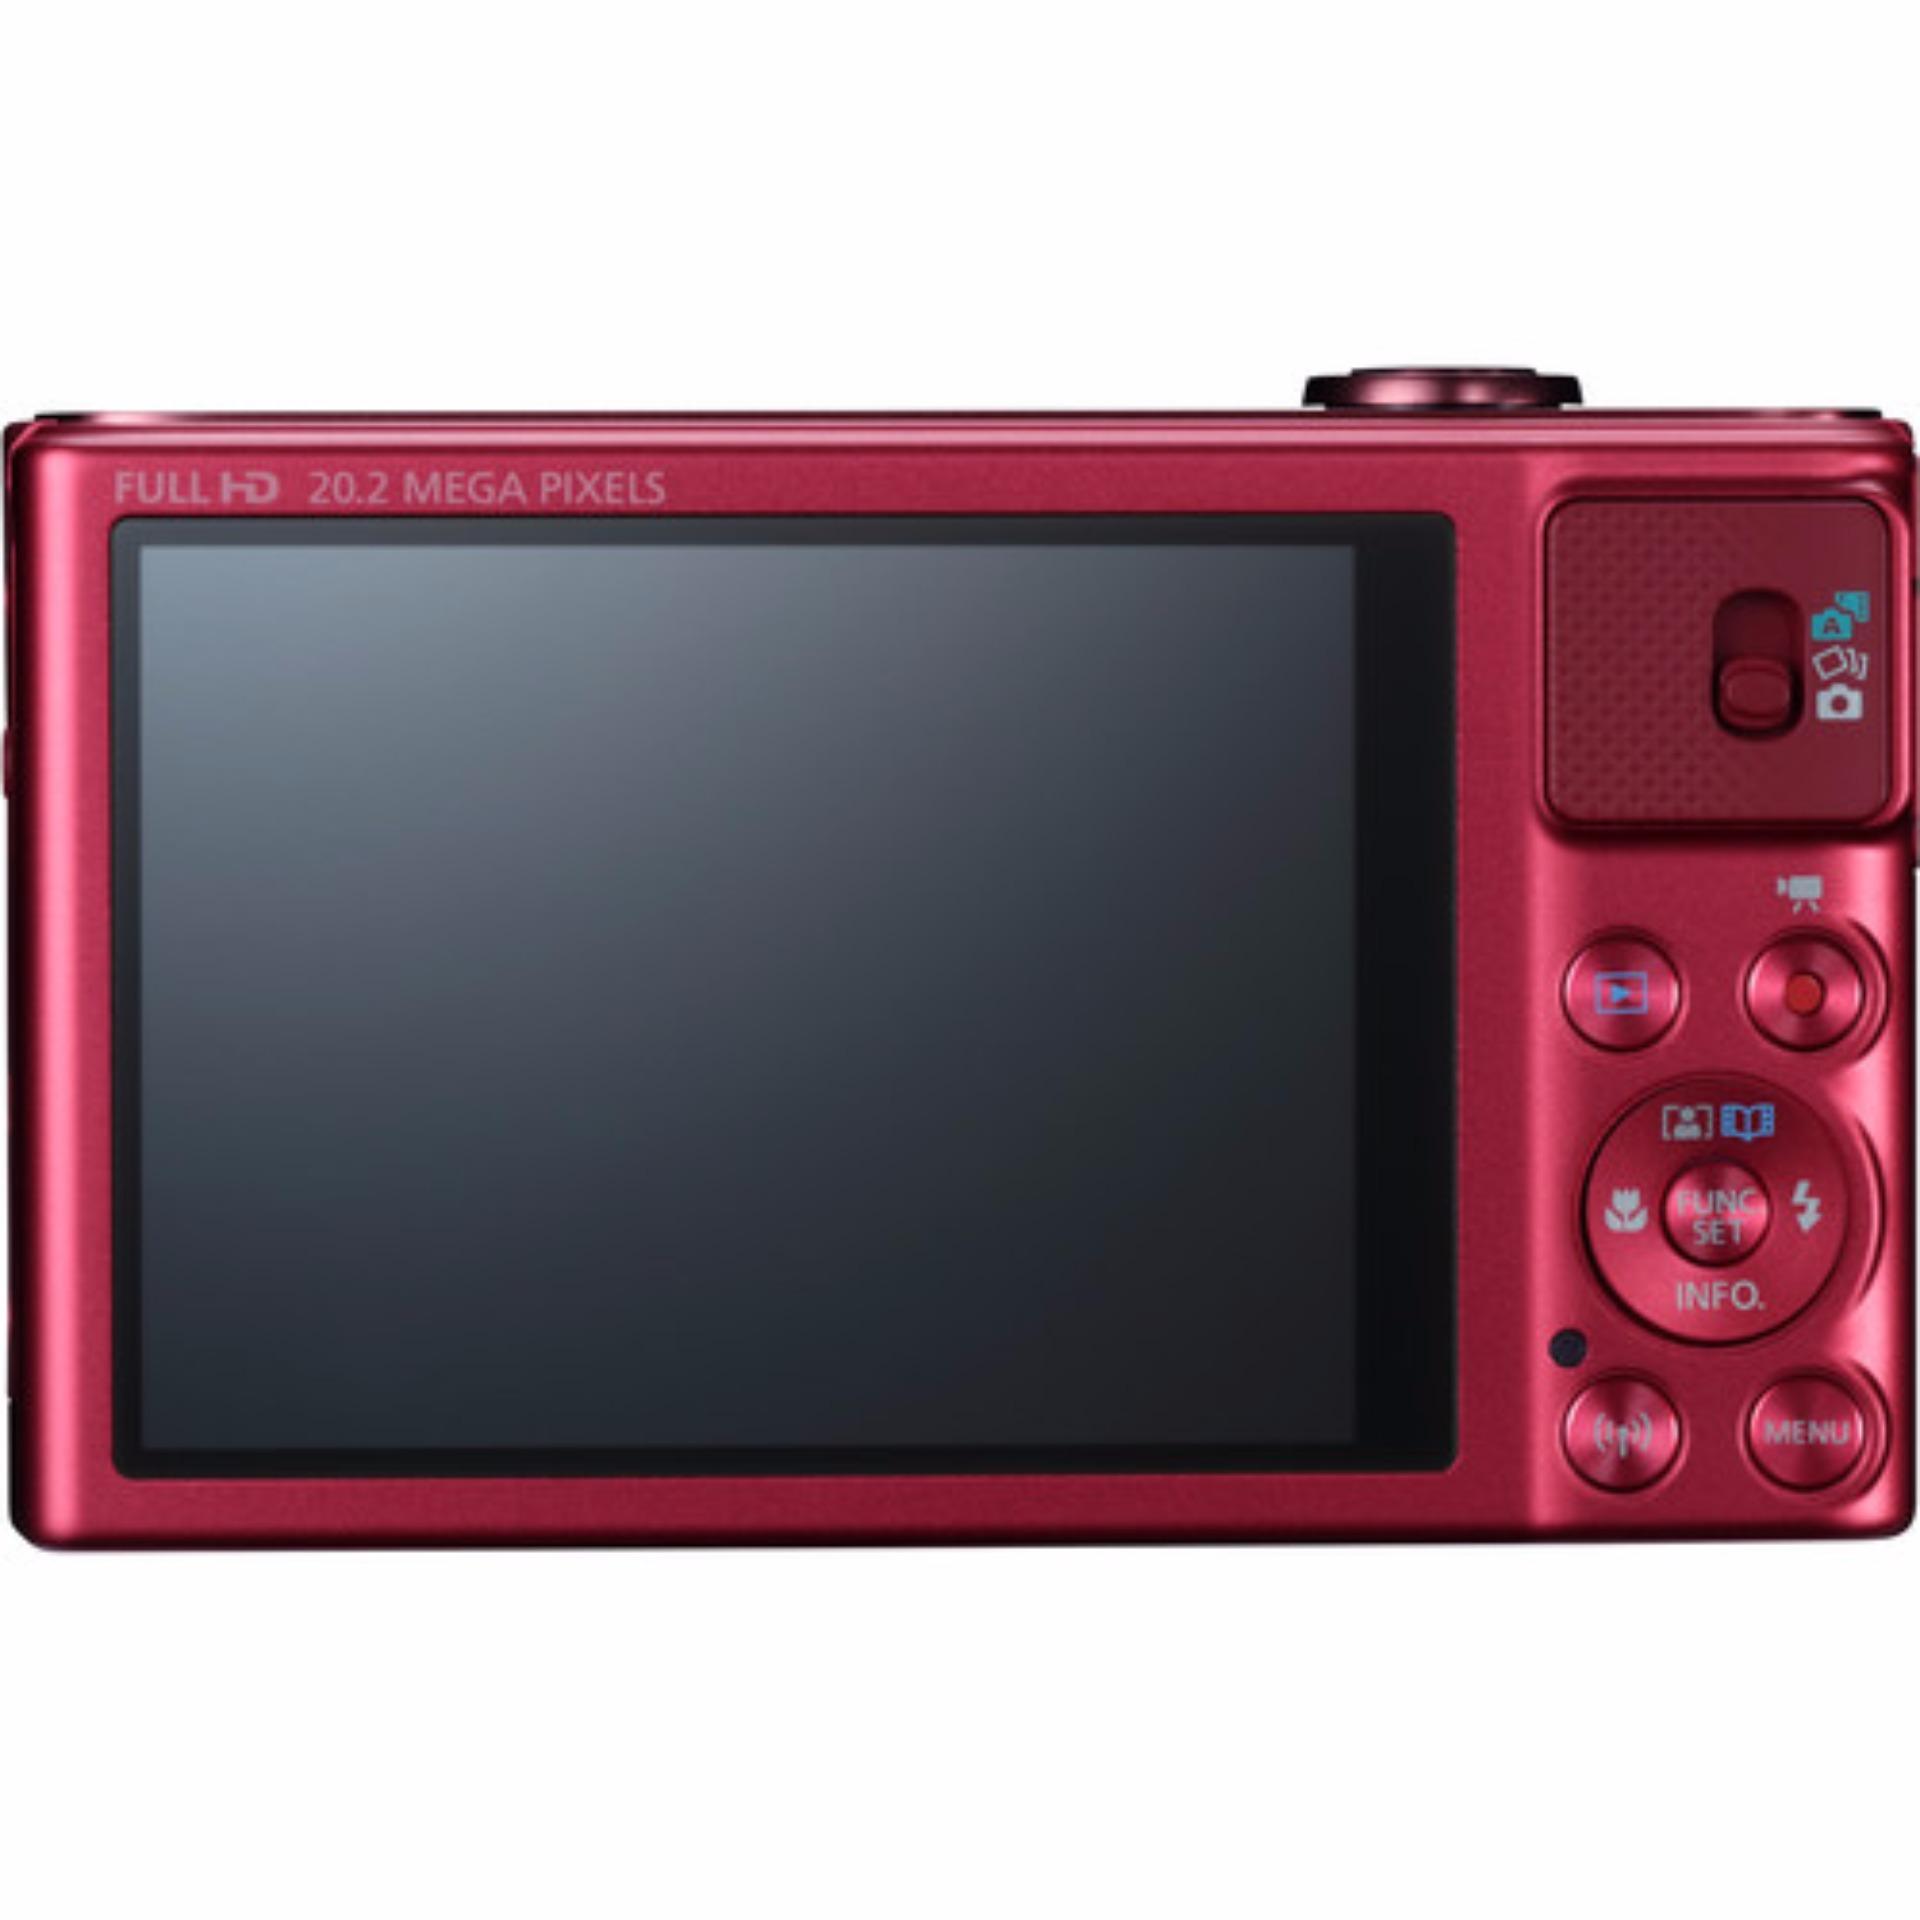 Canon Powershot SX620 HS (Red)(Red)